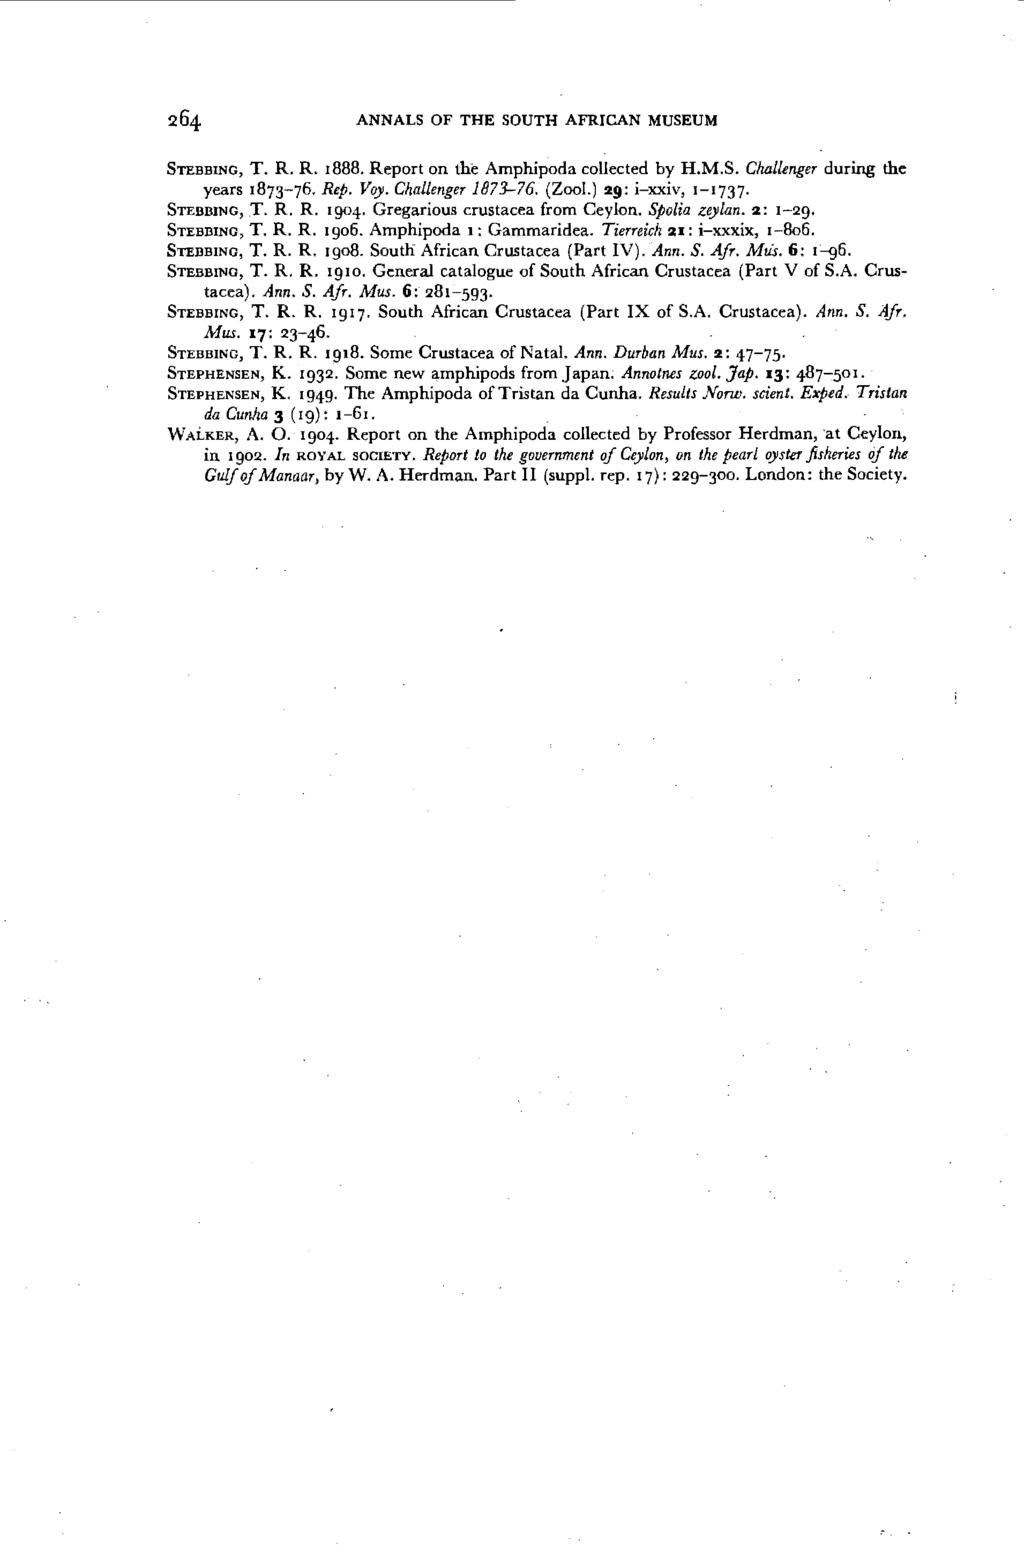 ANNALS OF THE SOUTH AFRICAN MUSEUM STEBBING, T. R. R. 1888. Report on the Amphipoda collected by H.M.S. Cho.llenger during the years 1873-76. Rep. Voy. Challenger 1873-76. (Zoo!.) 29: i-xxiv, 1-1737.